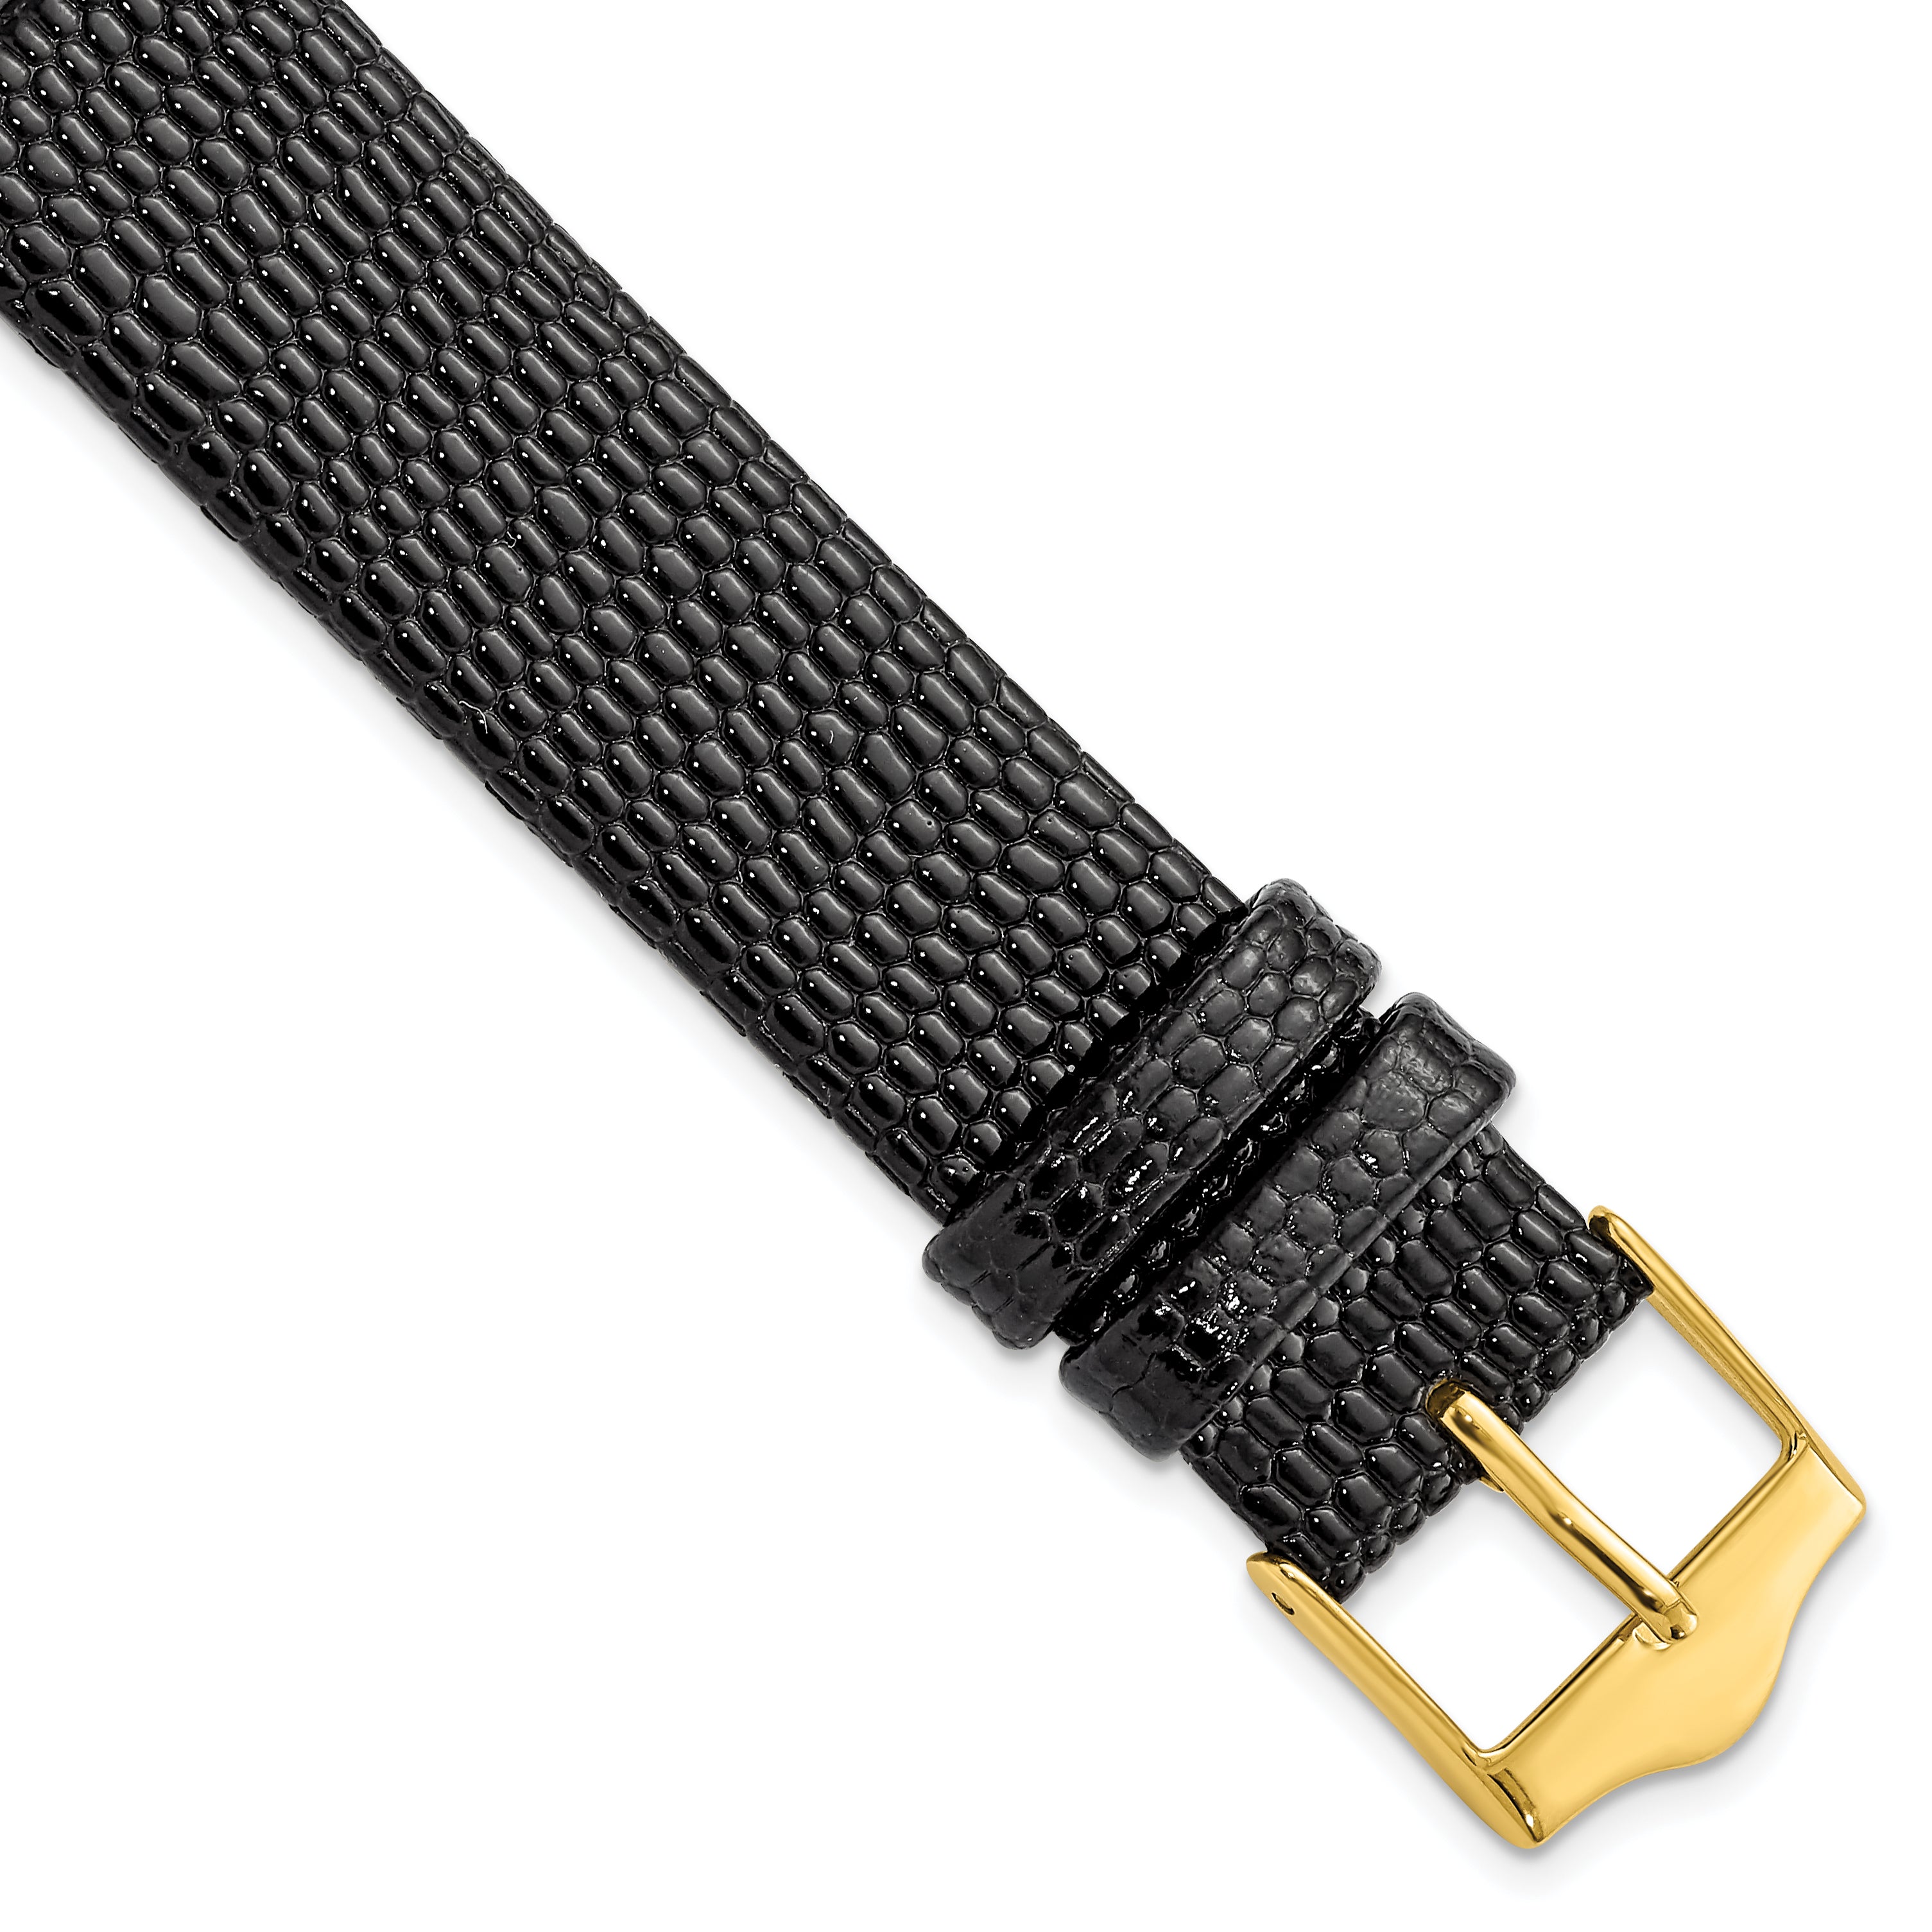 DeBeer 17mm Flat Black Lizard Grain Leather with Gold-tone Buckle 7.5 inch Watch Band